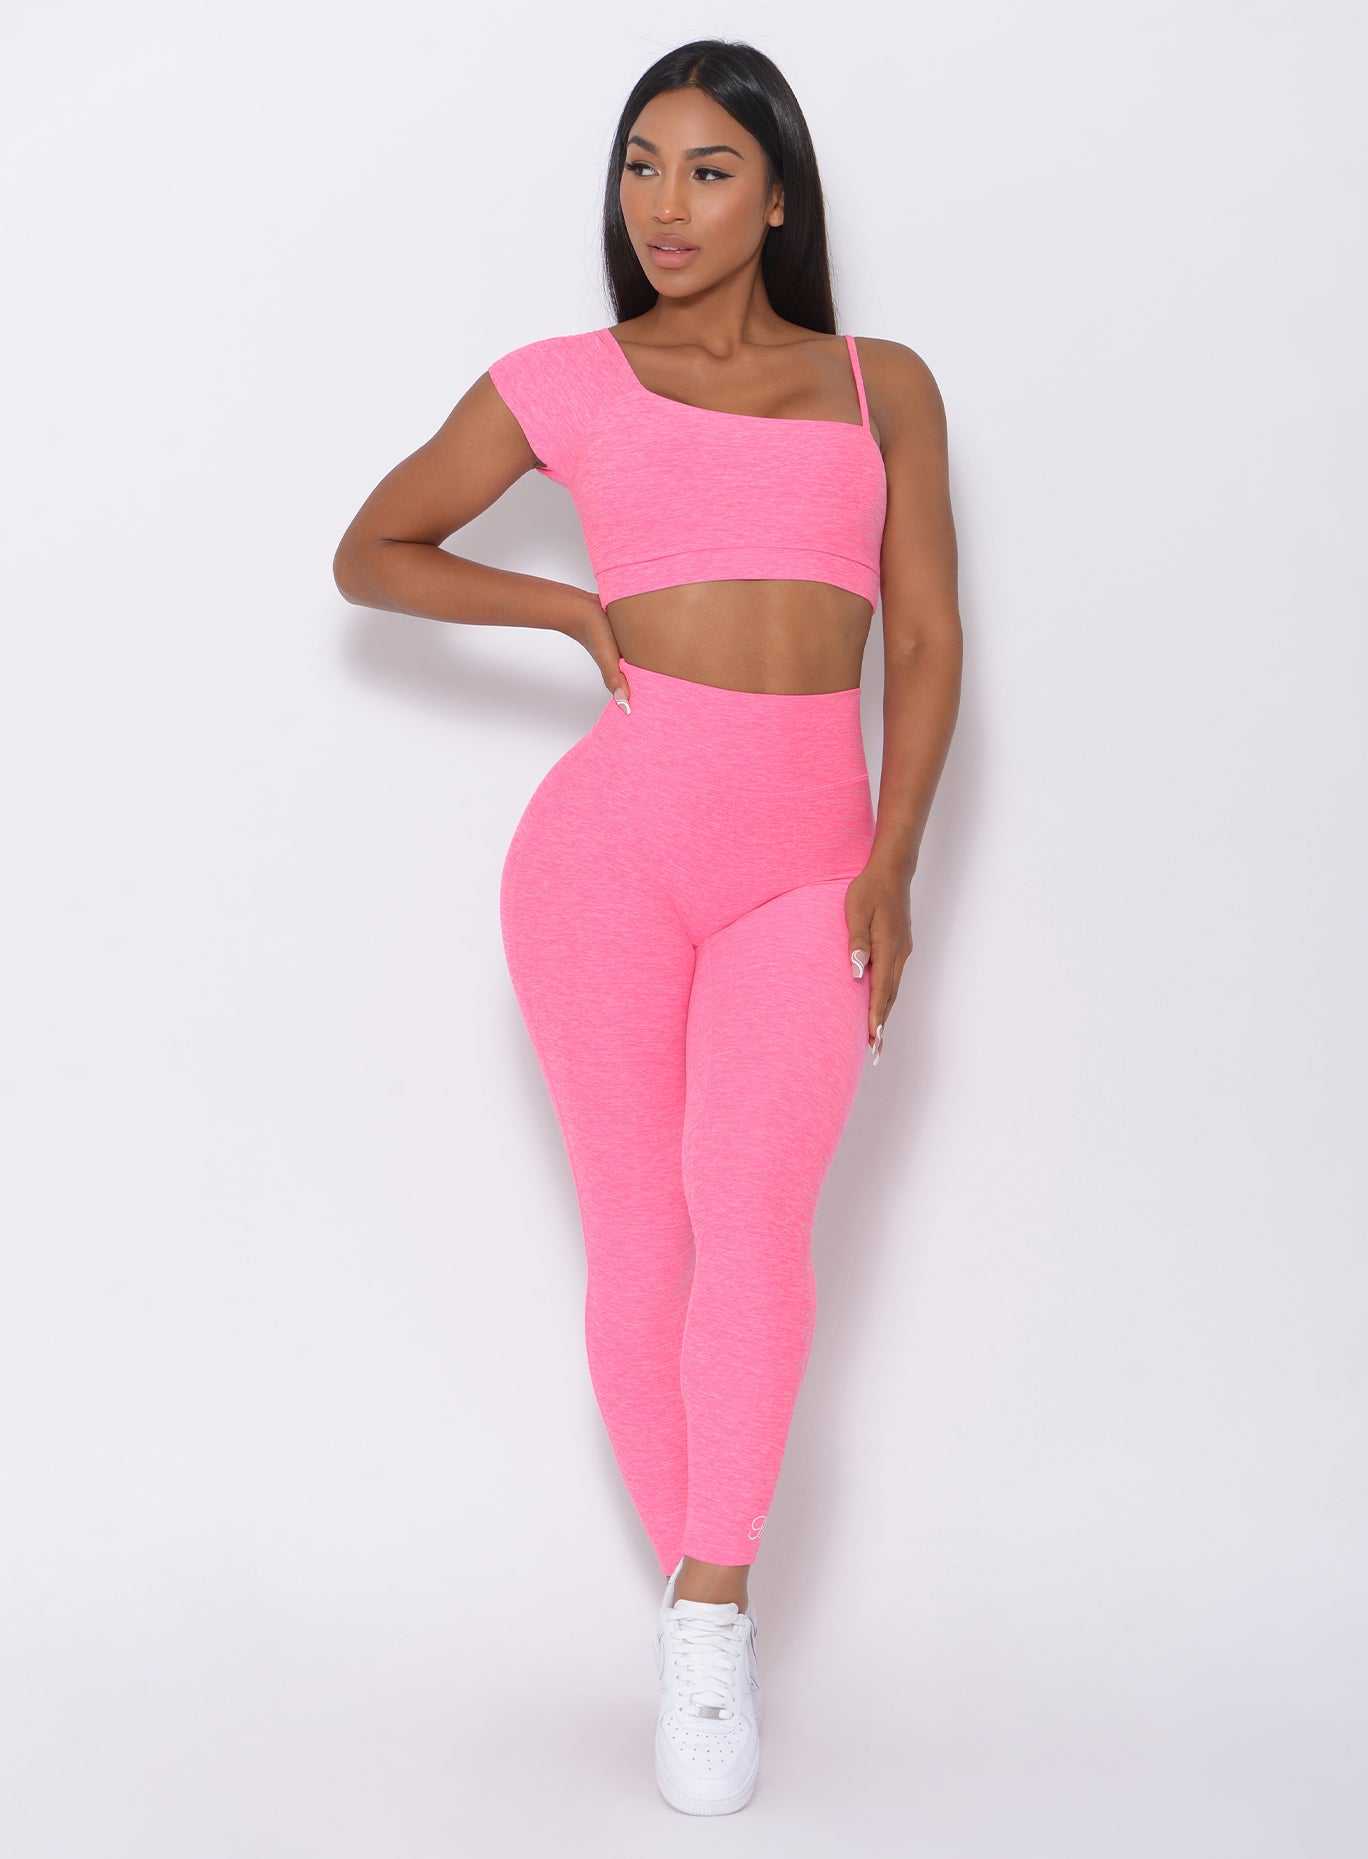 Front view of the model with her right hand on waist wearing our Adore Sports Bra in pink and a matching leggings